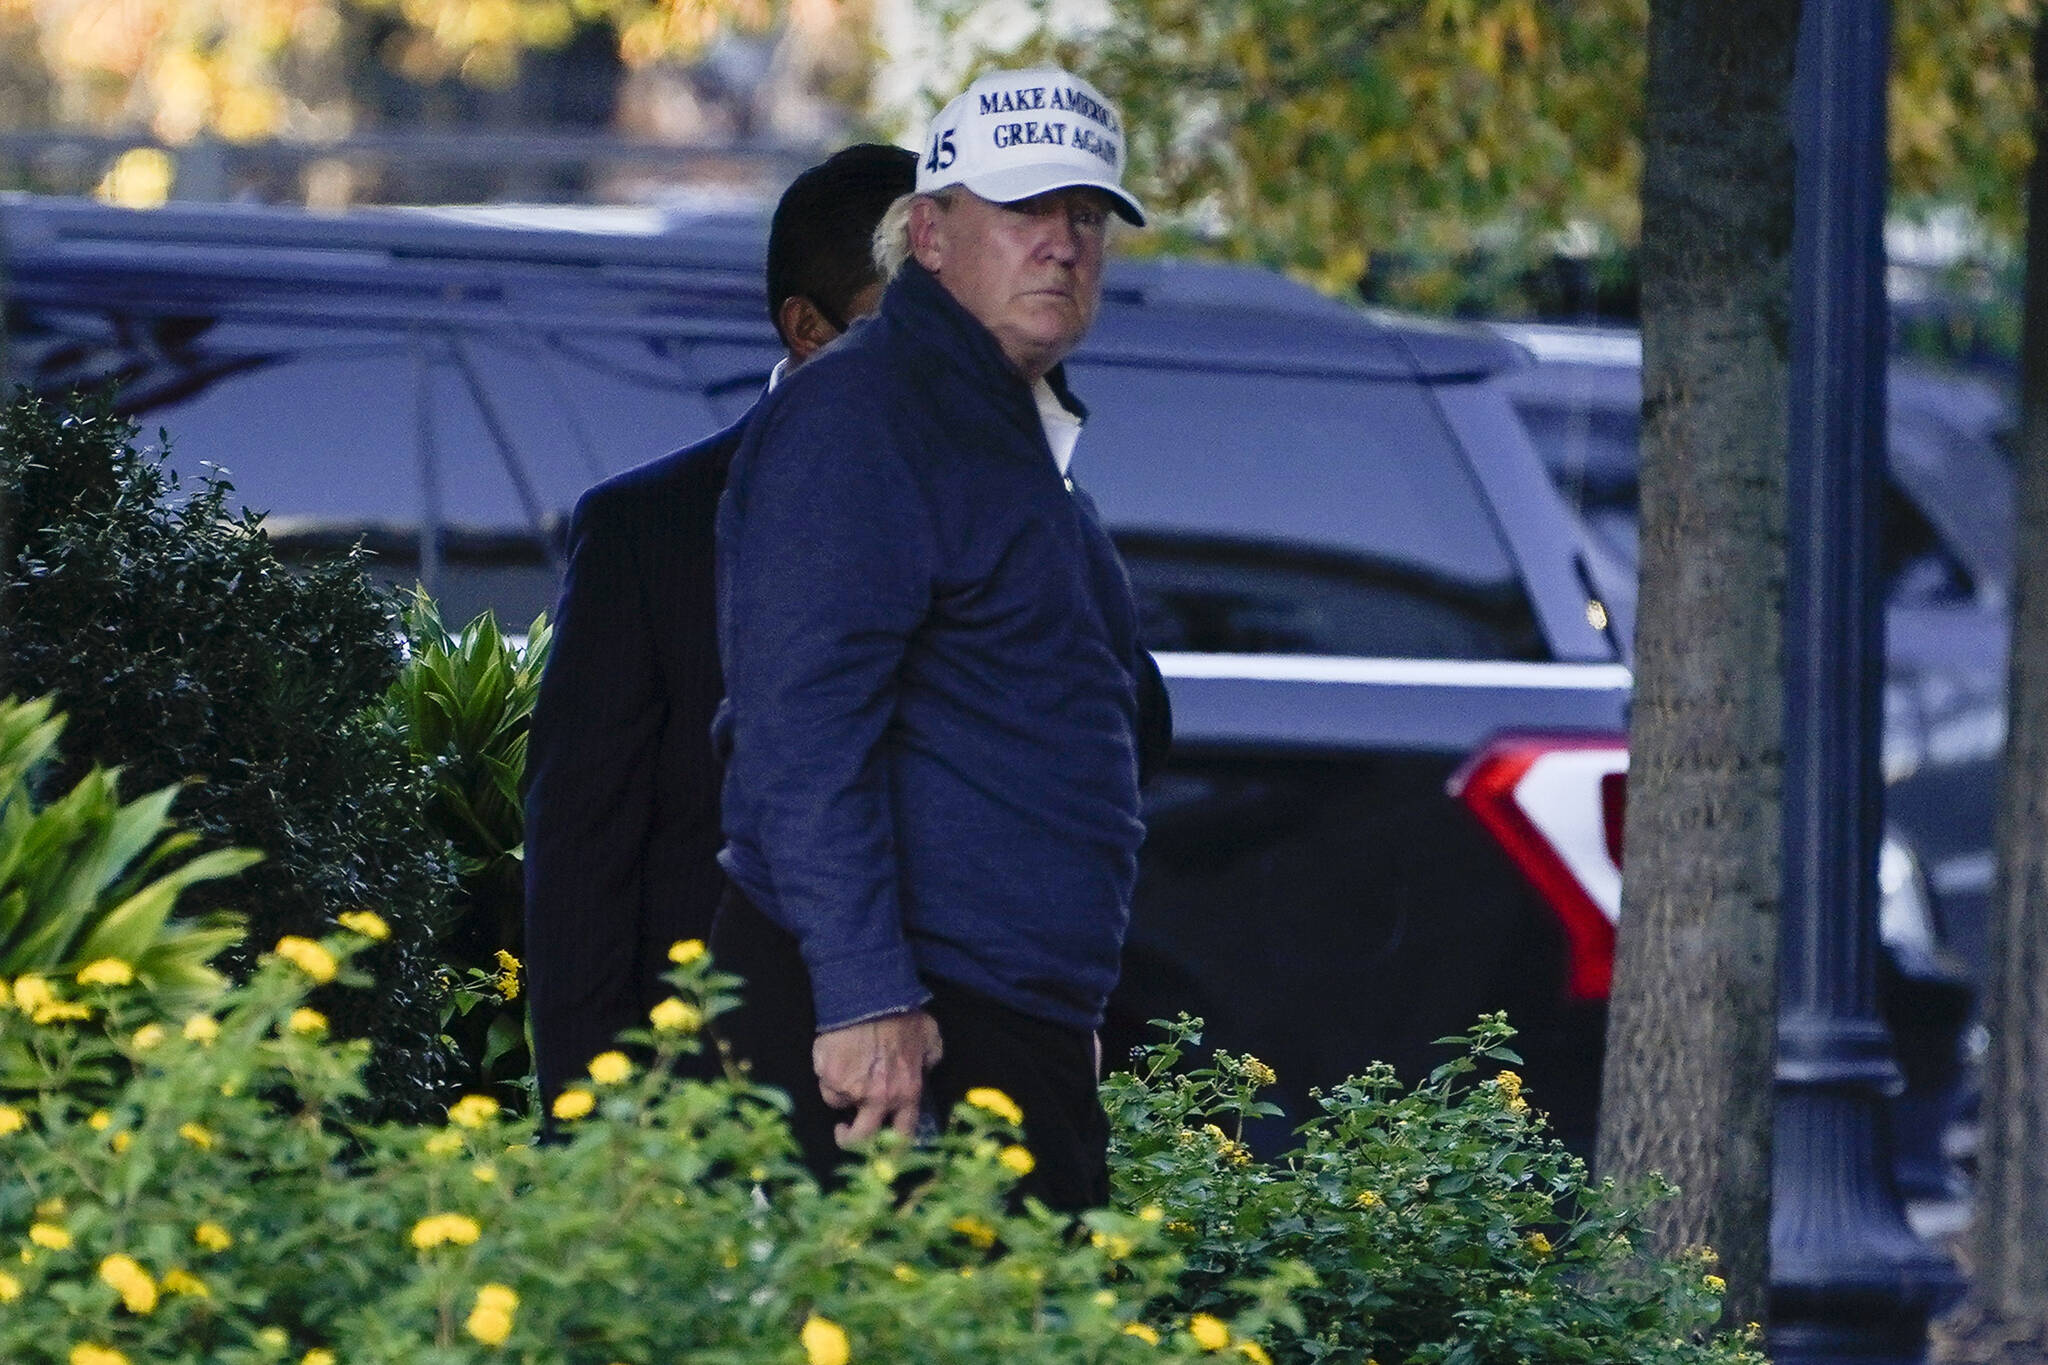 President Donald Trump arrives at the White House after golfing Nov. 7, 2020, in Washington. (AP Photo/Evan Vucci, File)